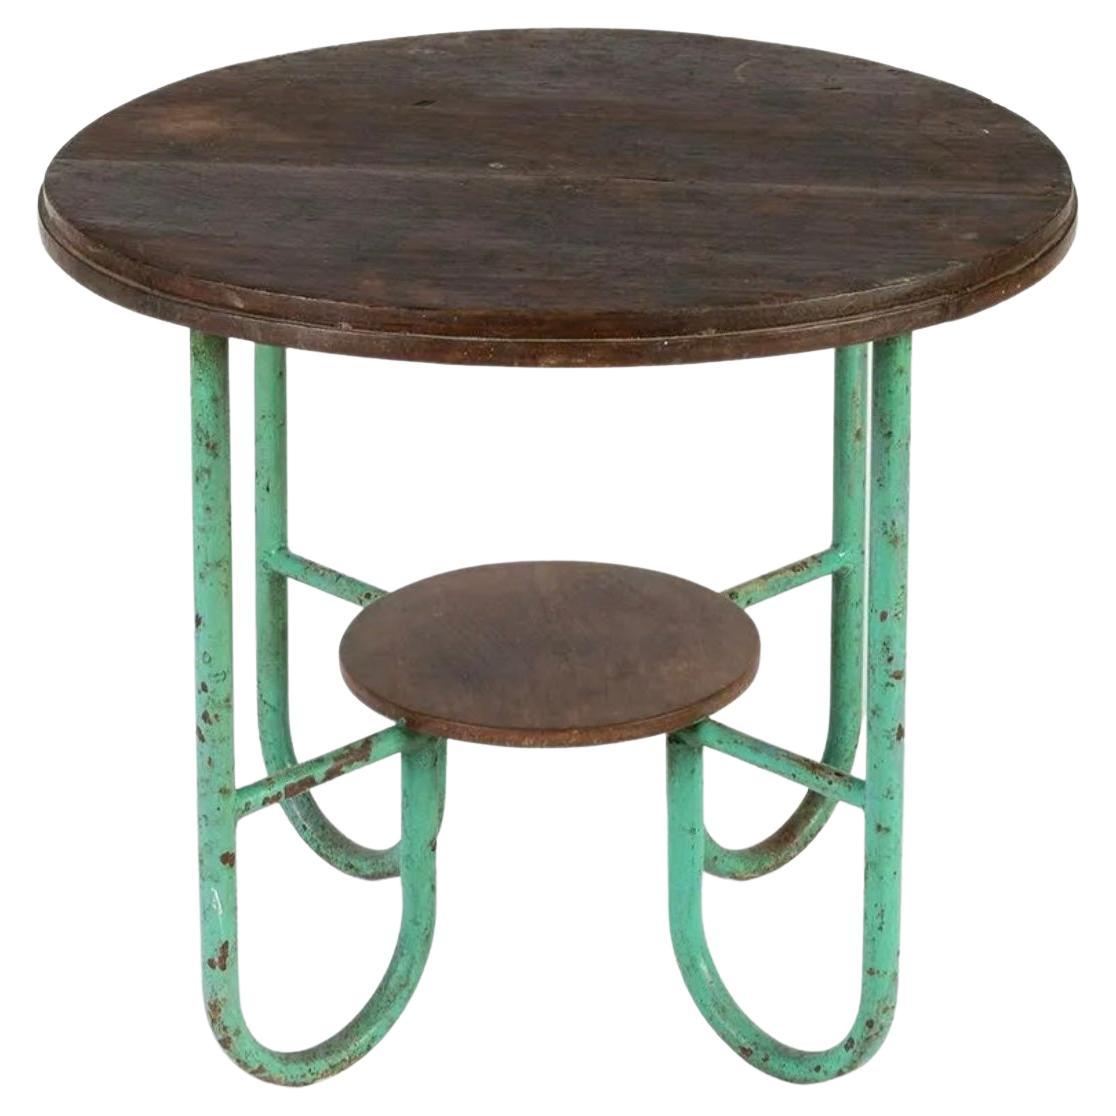 Vintage Industrial Coffee Table, Side Table, France, 1930's Patina Walnut Steel  For Sale